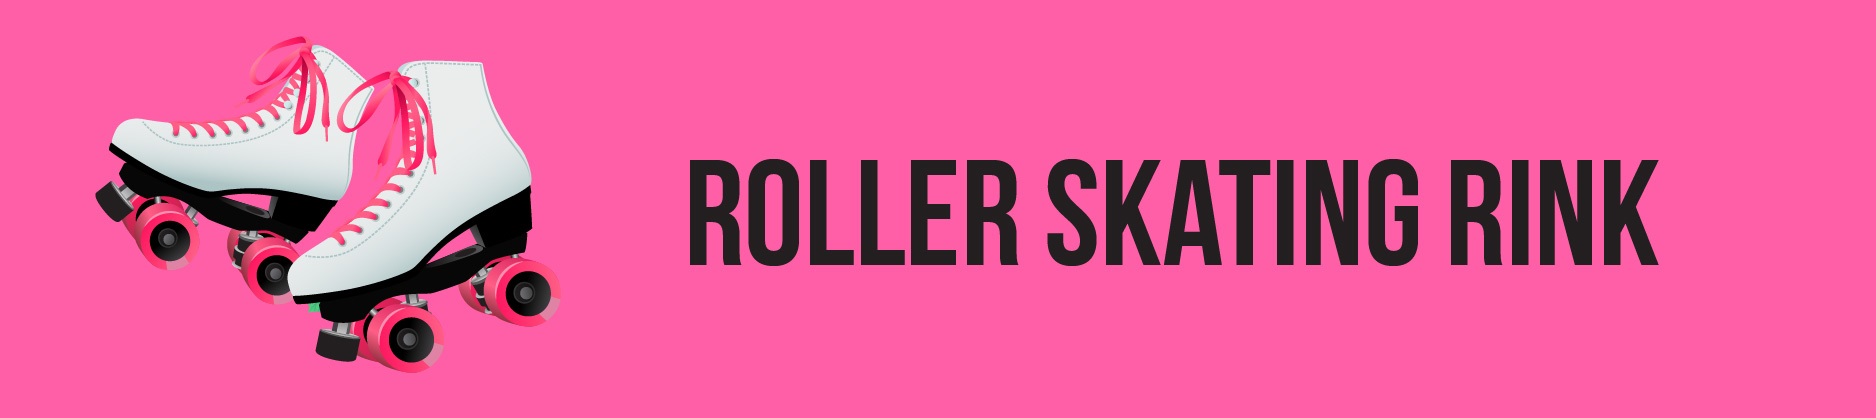 Roller skates on a pink background and roller skating rink text